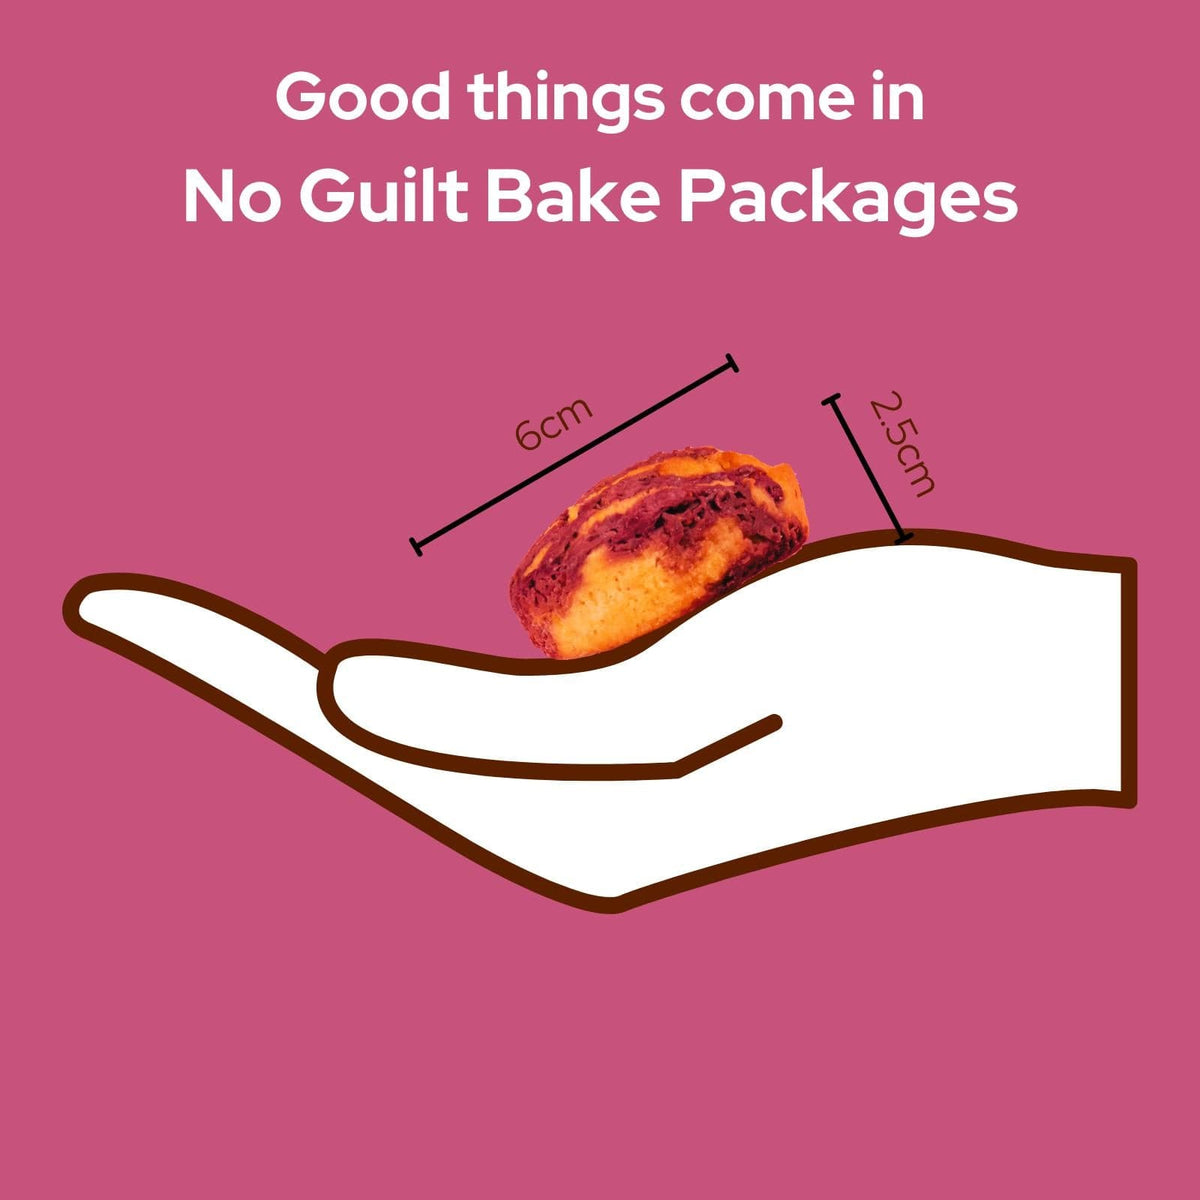 Good things come in No Guilt Bakes&#39; Fruity Variety Cake Bite Pack with raspberry swirls and lemon &amp; poppy seed bake packages.